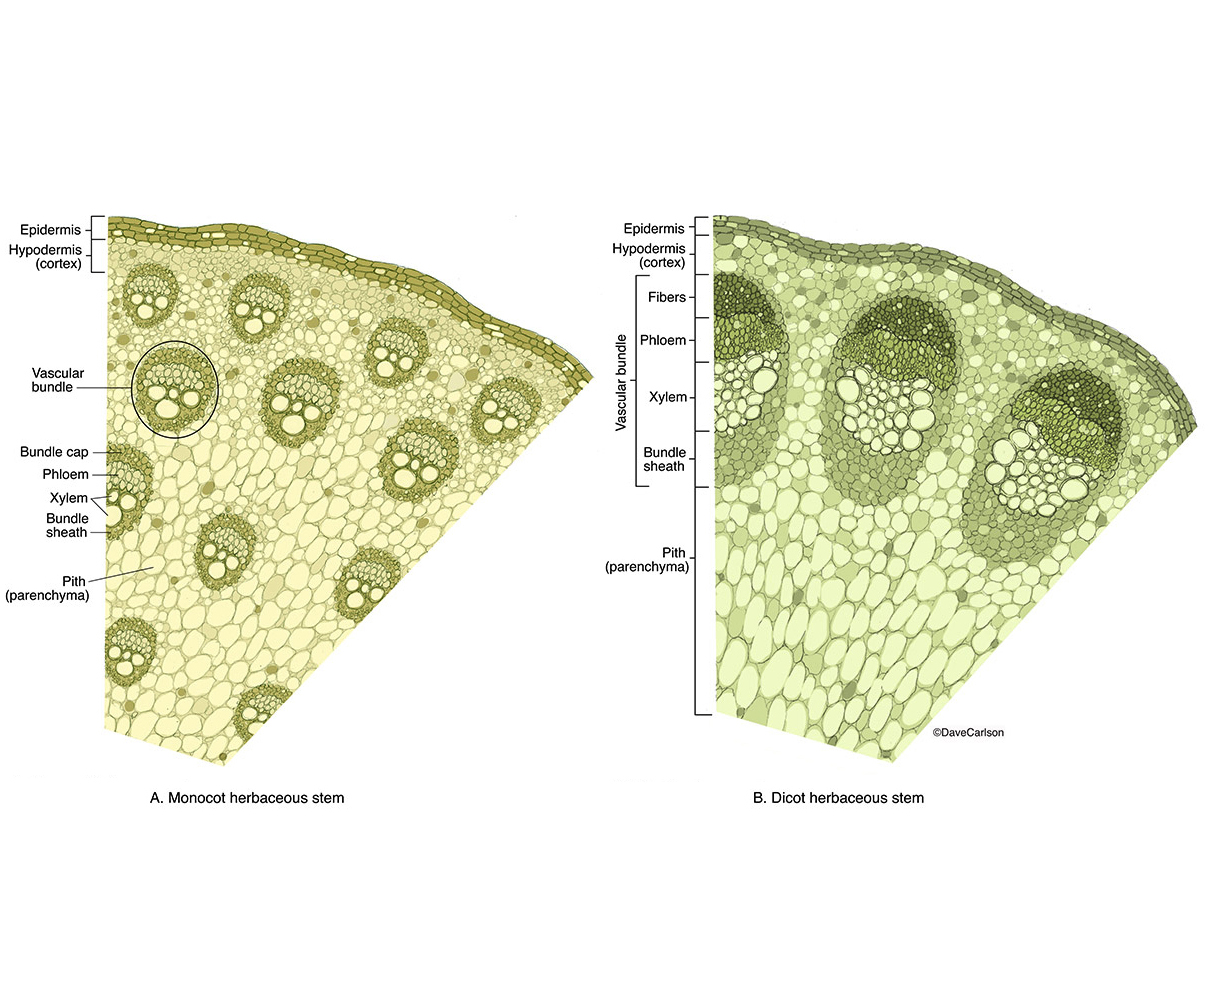 Cross section illustrations showing the structural anatomy of monocot and dicot stems.